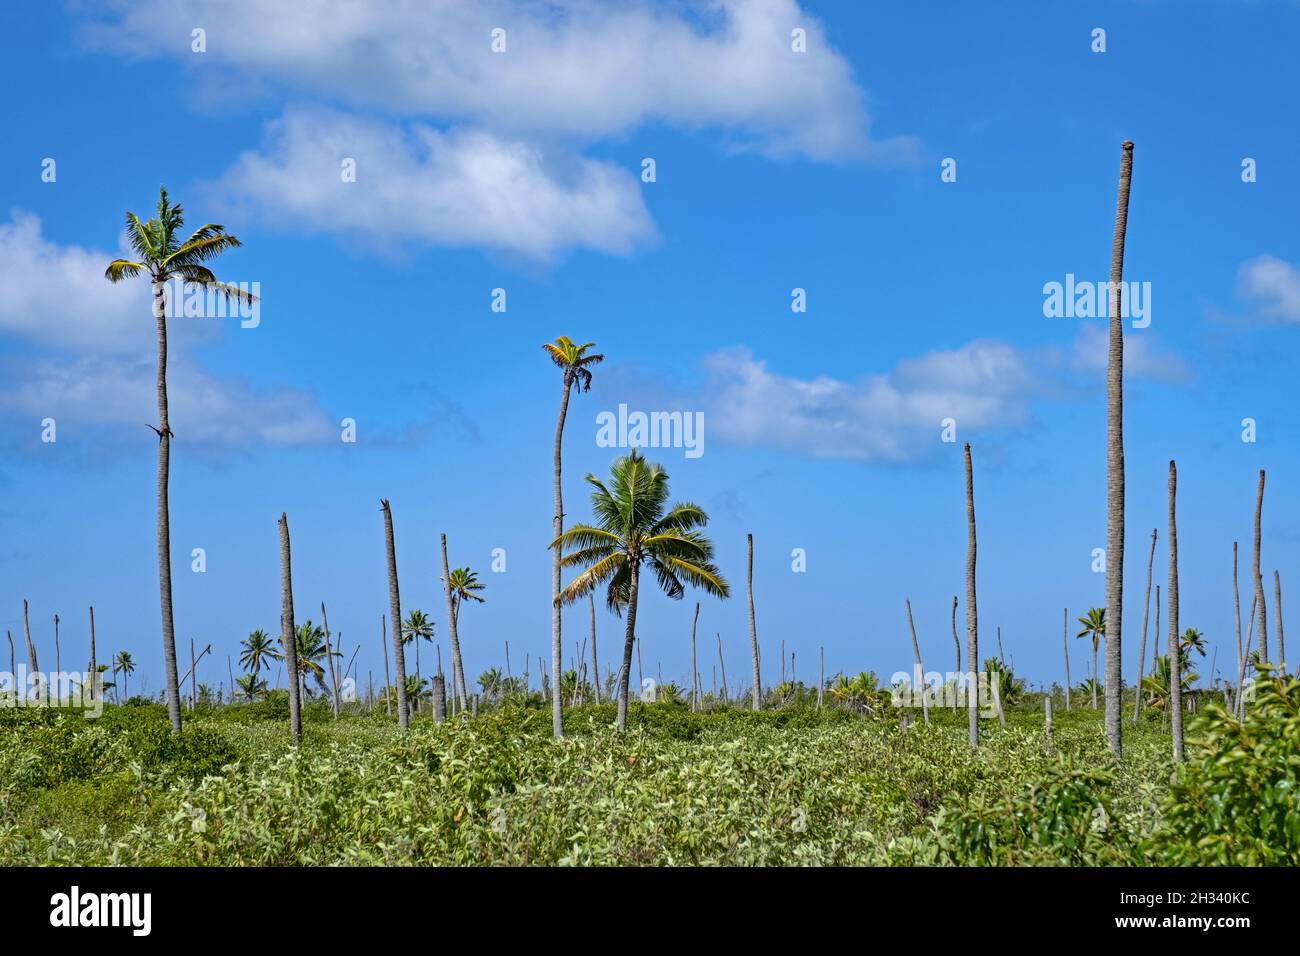 Broken palm trees, snapped by hurricane winds on the the island of Barbuda, part of the country Antigua and Barbuda, West Indies in the Caribbean Sea Stock Photo